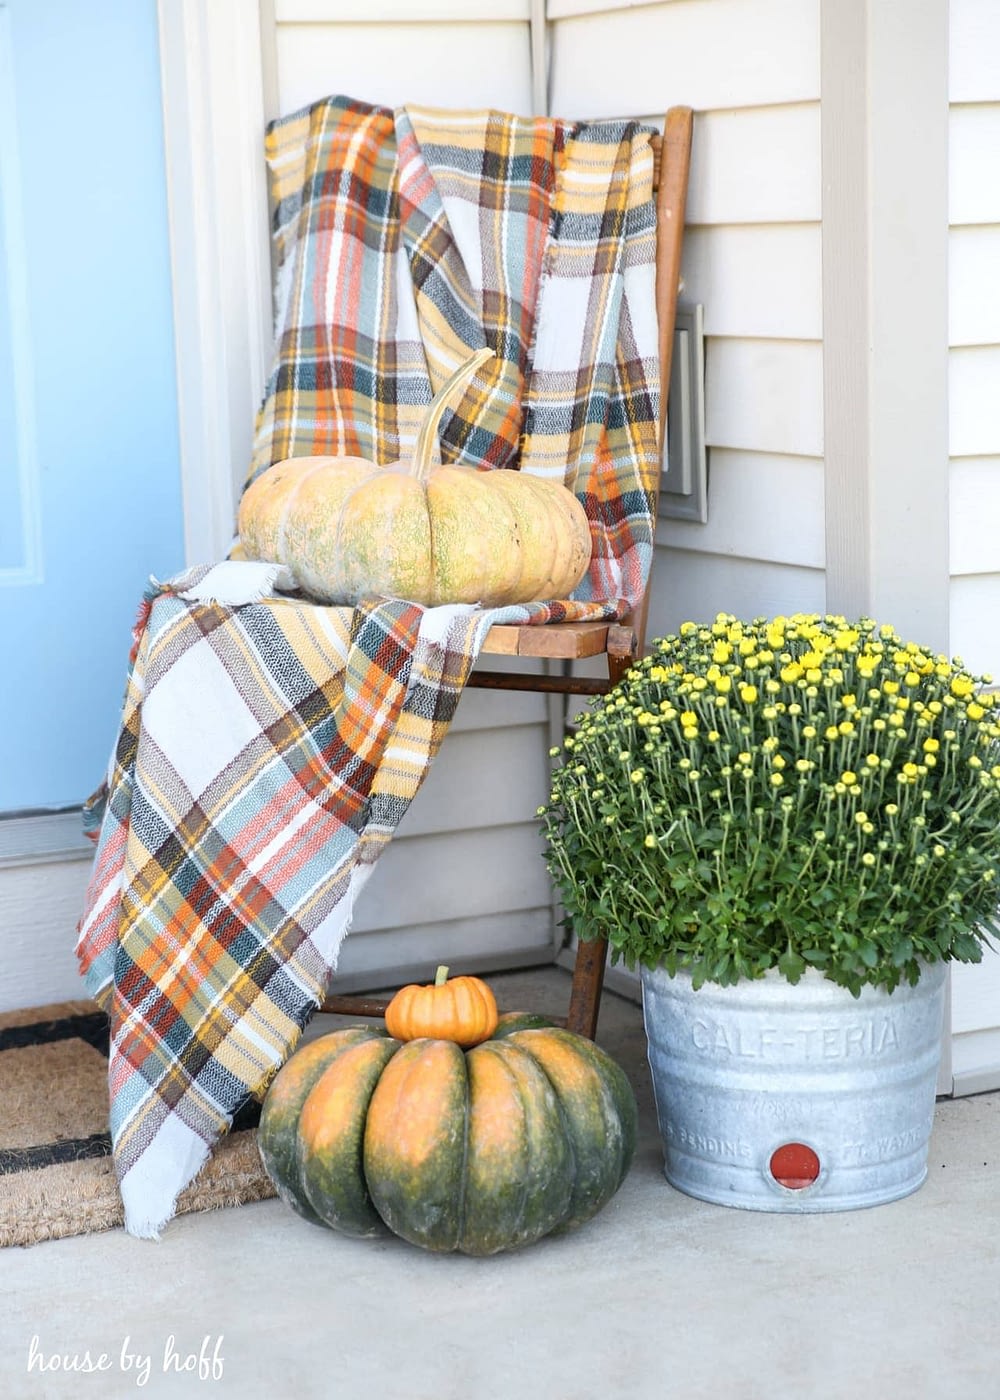 Fall front porch ideas using a plaid scarf draped over a chair with some pumpkins in a corner